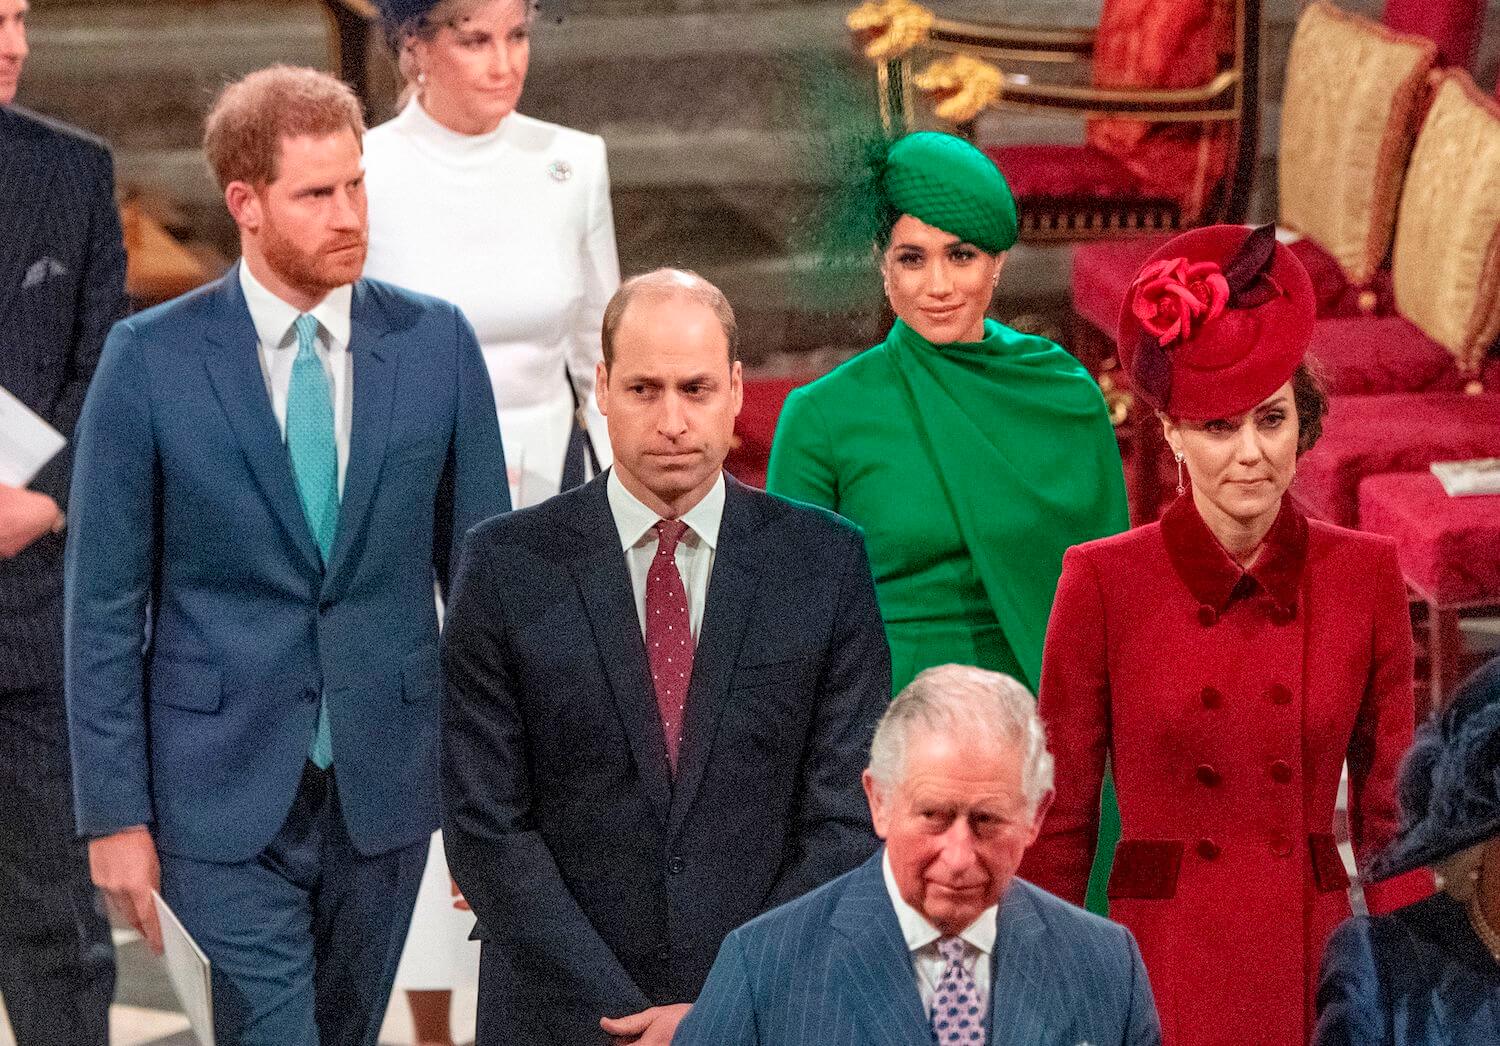 Prince Harry wears a suit and walks with Meghan Markle dressed in green with other members of the royal family